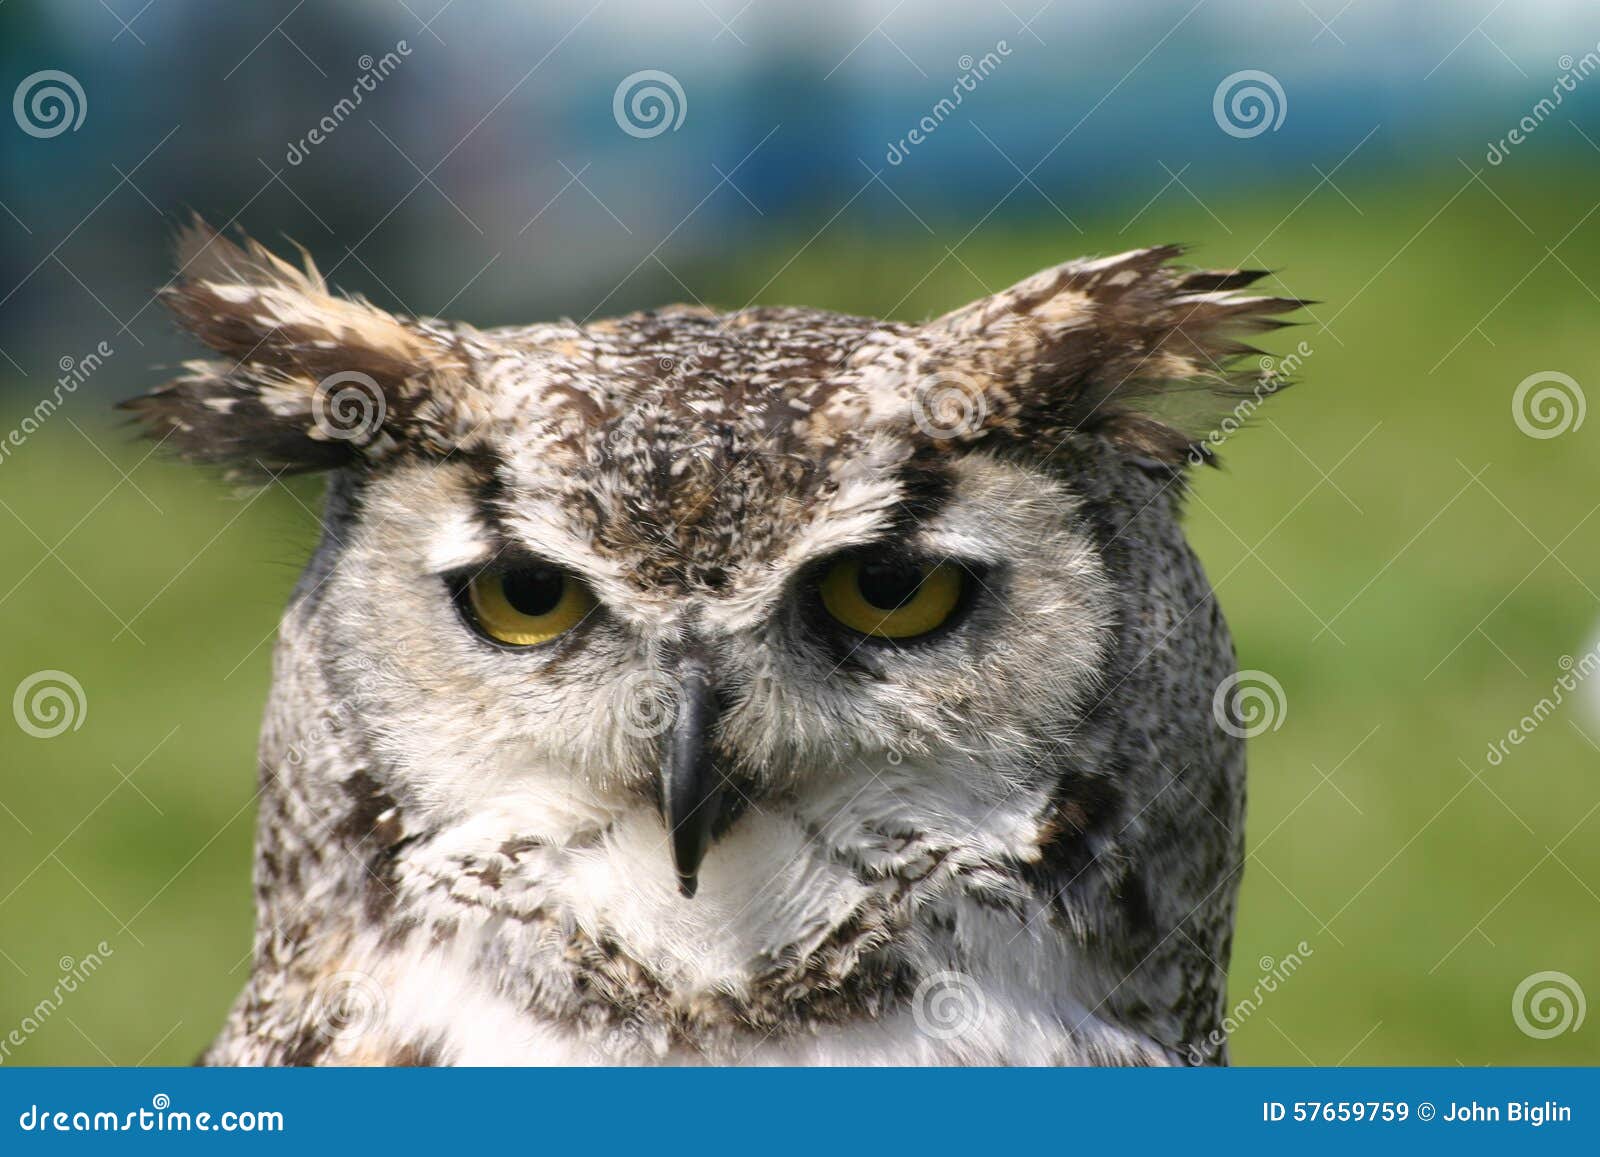 Owl head and neck stock image. Image of eyes, grass, bird - 57659759